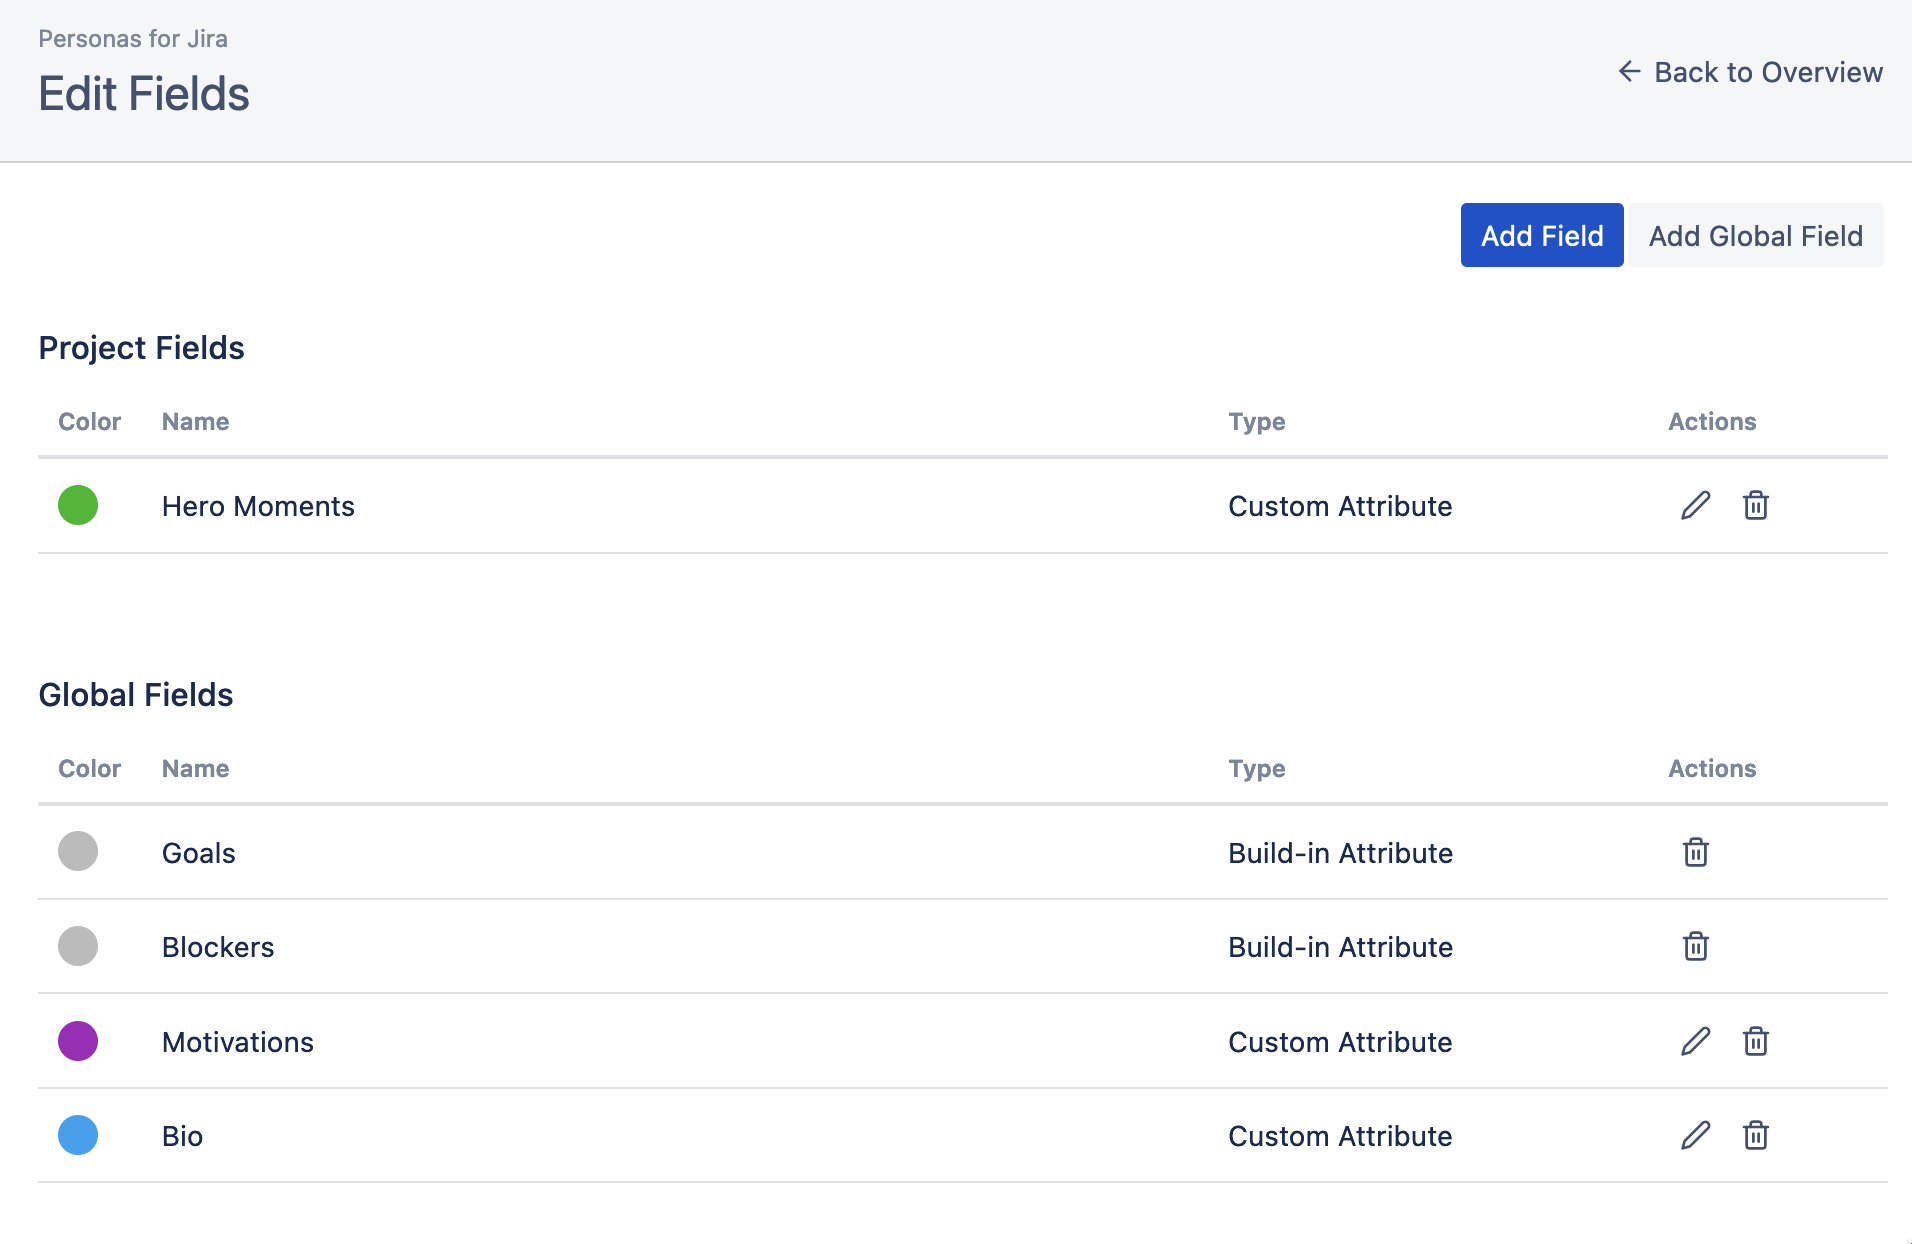 Edit Fields Screen for Personas for Jira